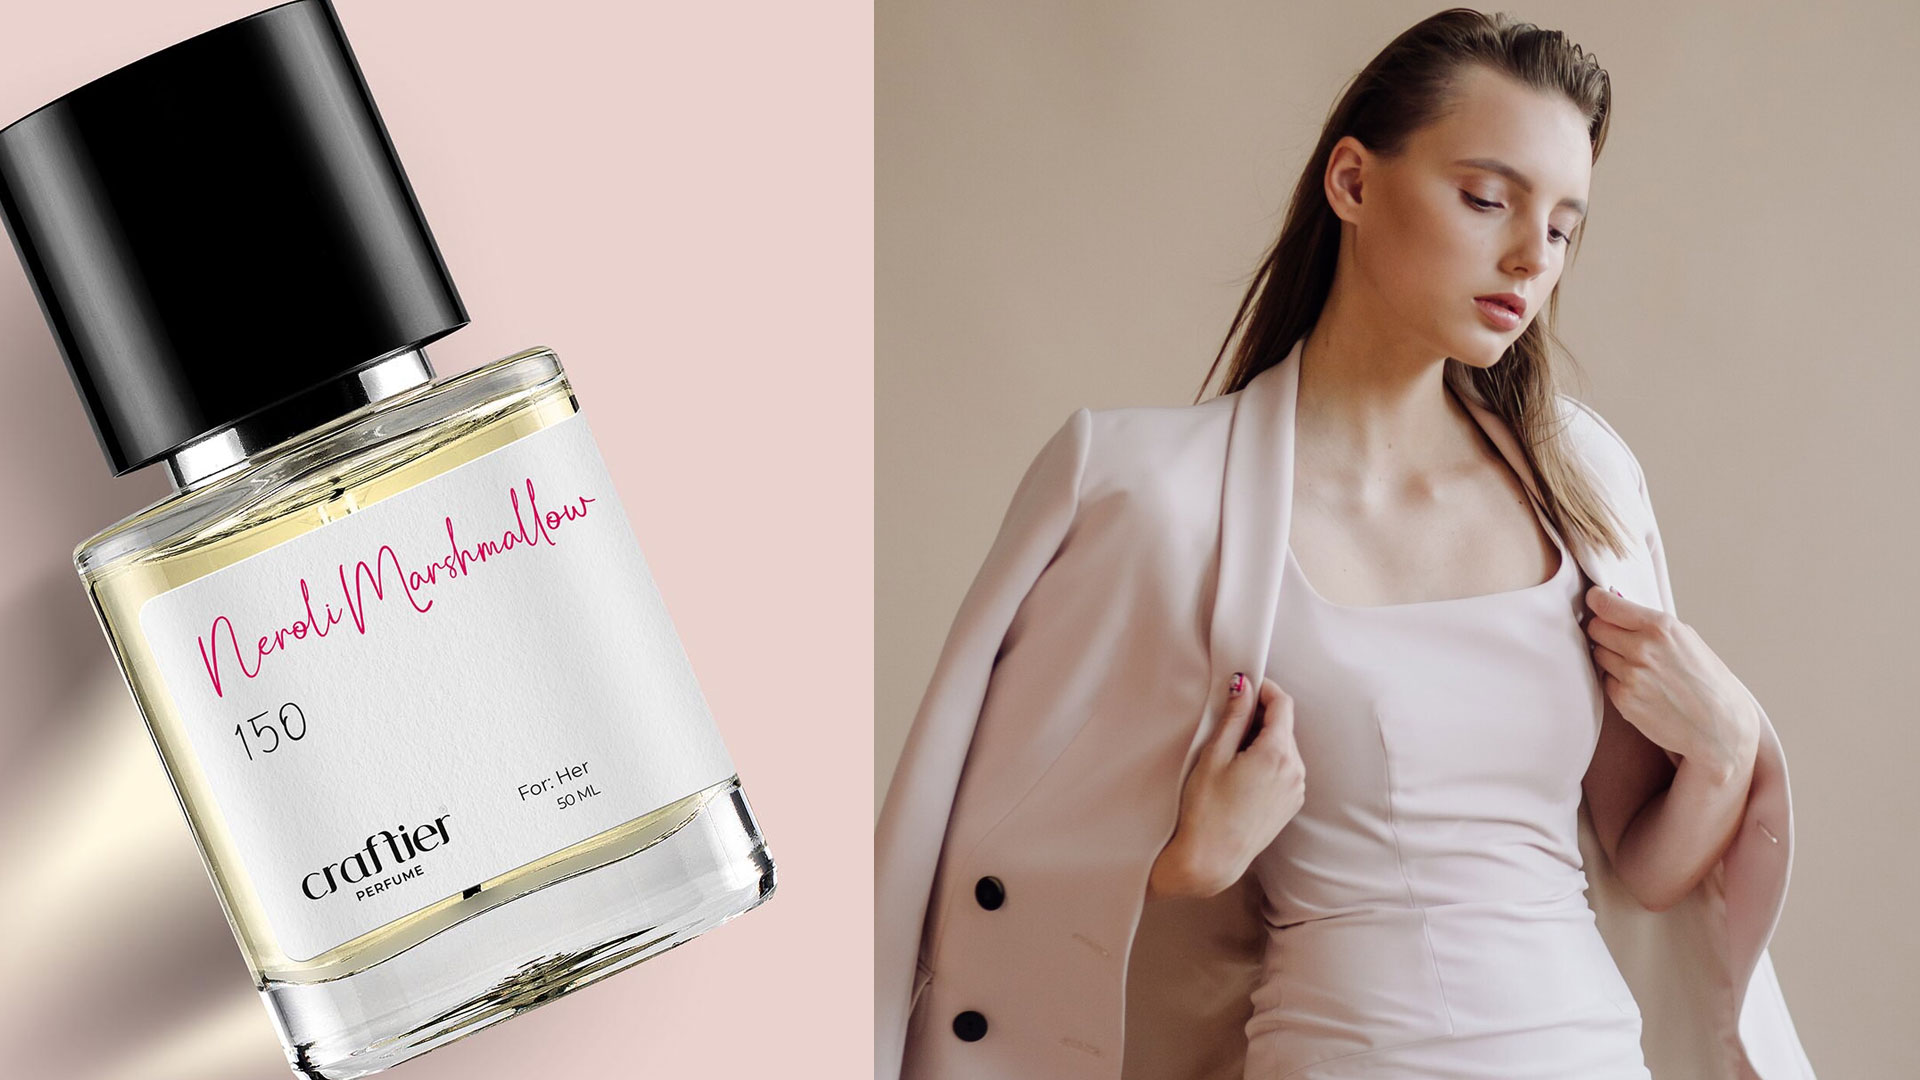 Make an Impression with the Top Quality Women's Daily Fragrances ​